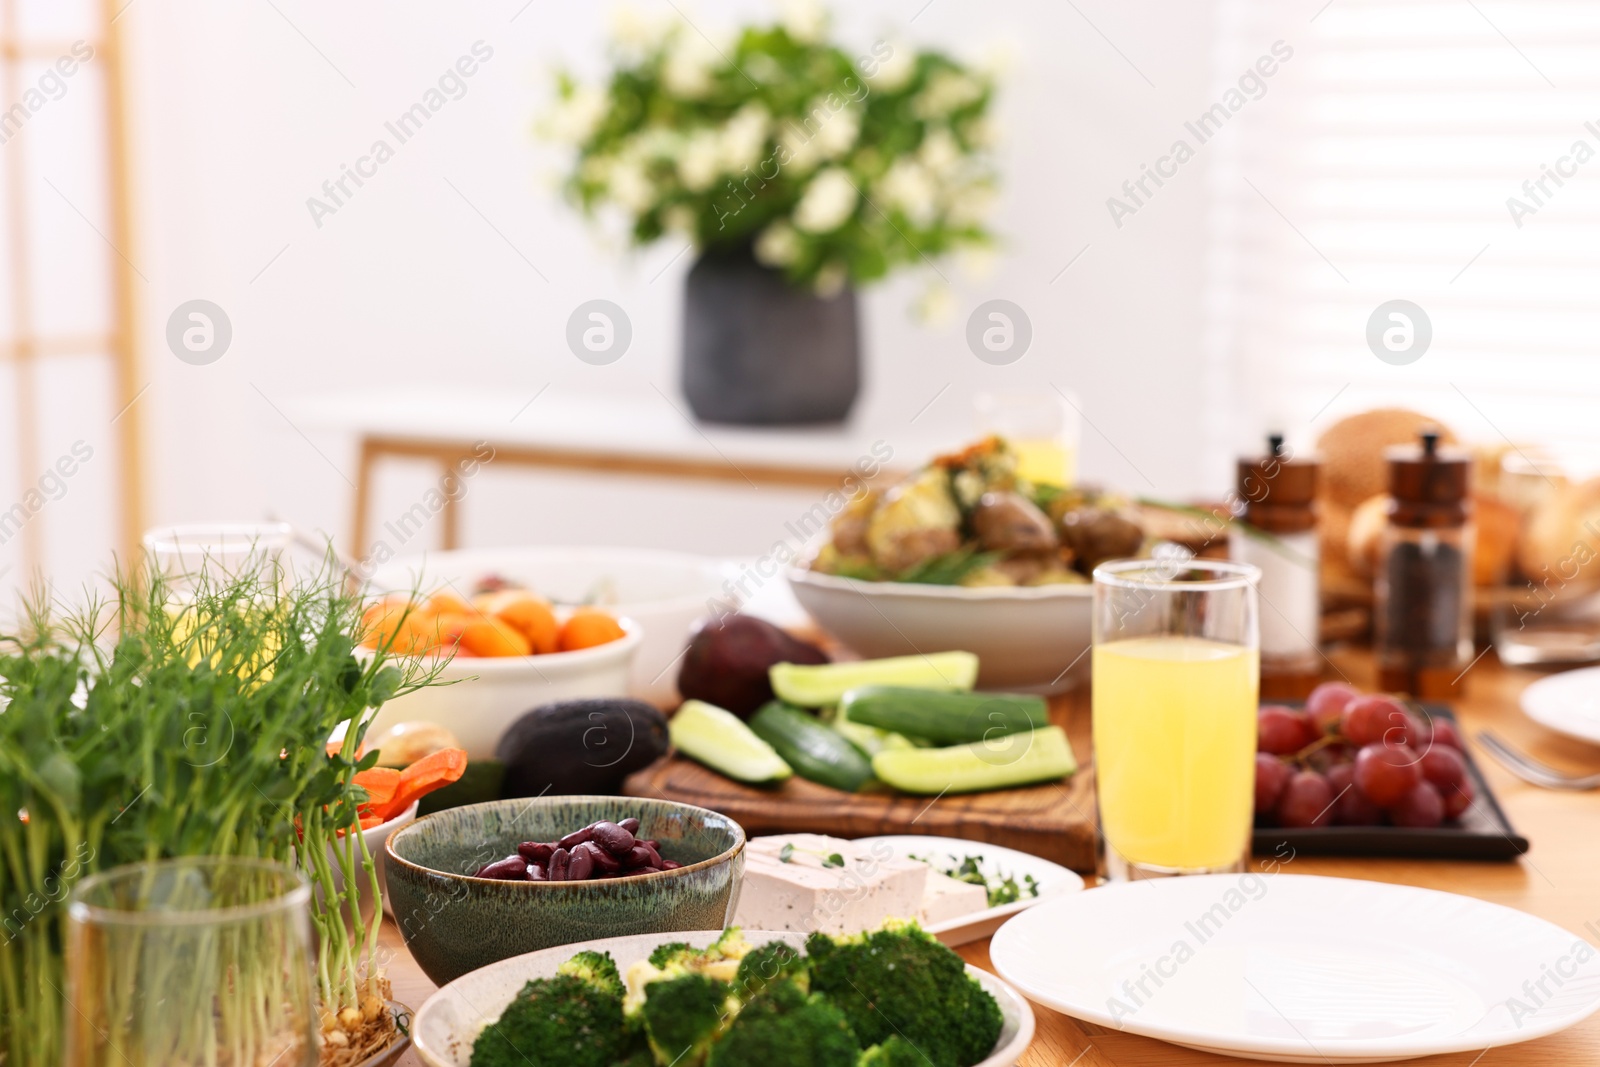 Photo of Healthy vegetarian food and glass of juice on table indoors